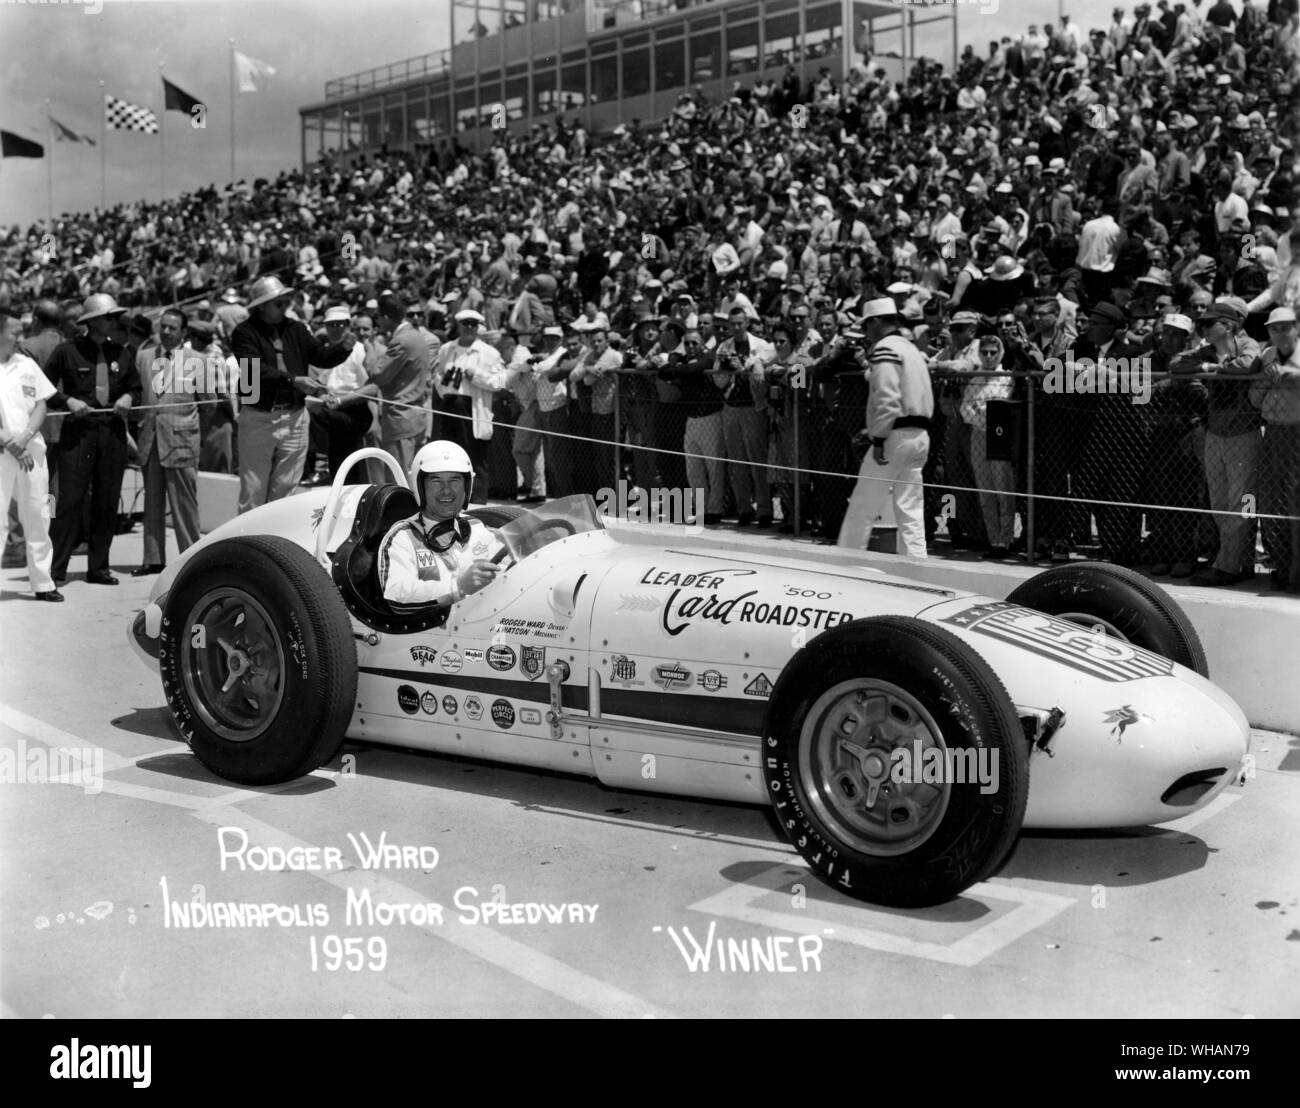 Indianapolis Motor Speedway.1959. Vincitore Rodger Ward Foto Stock